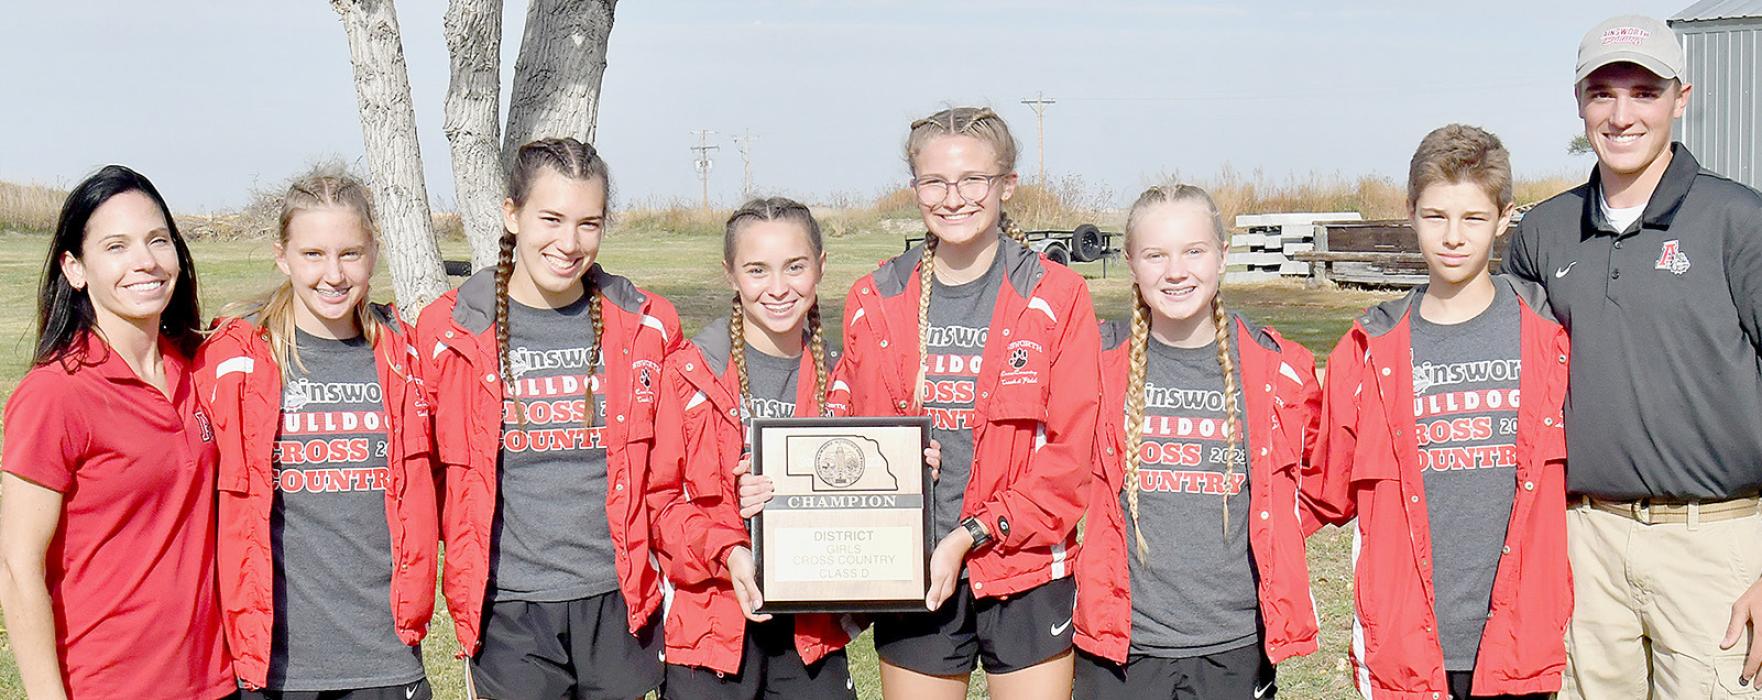 The Ainsworth Girls Cross Country Team along with Holden Beel of the Boys Cross Country Team have qualified for the 2023 State Cross Country Class D Meet in Kearney on Friday, October 20th. Team members qualifying for the state meet are (Left to Right): Co-Head Coach Katie Winters, Preselyn Goochey, Katherine Kerrigan, Tessa Barthel, Emma Kennedy, Kiley Orton, Holden Beel and Co-Head Coach Trey Schlueter.